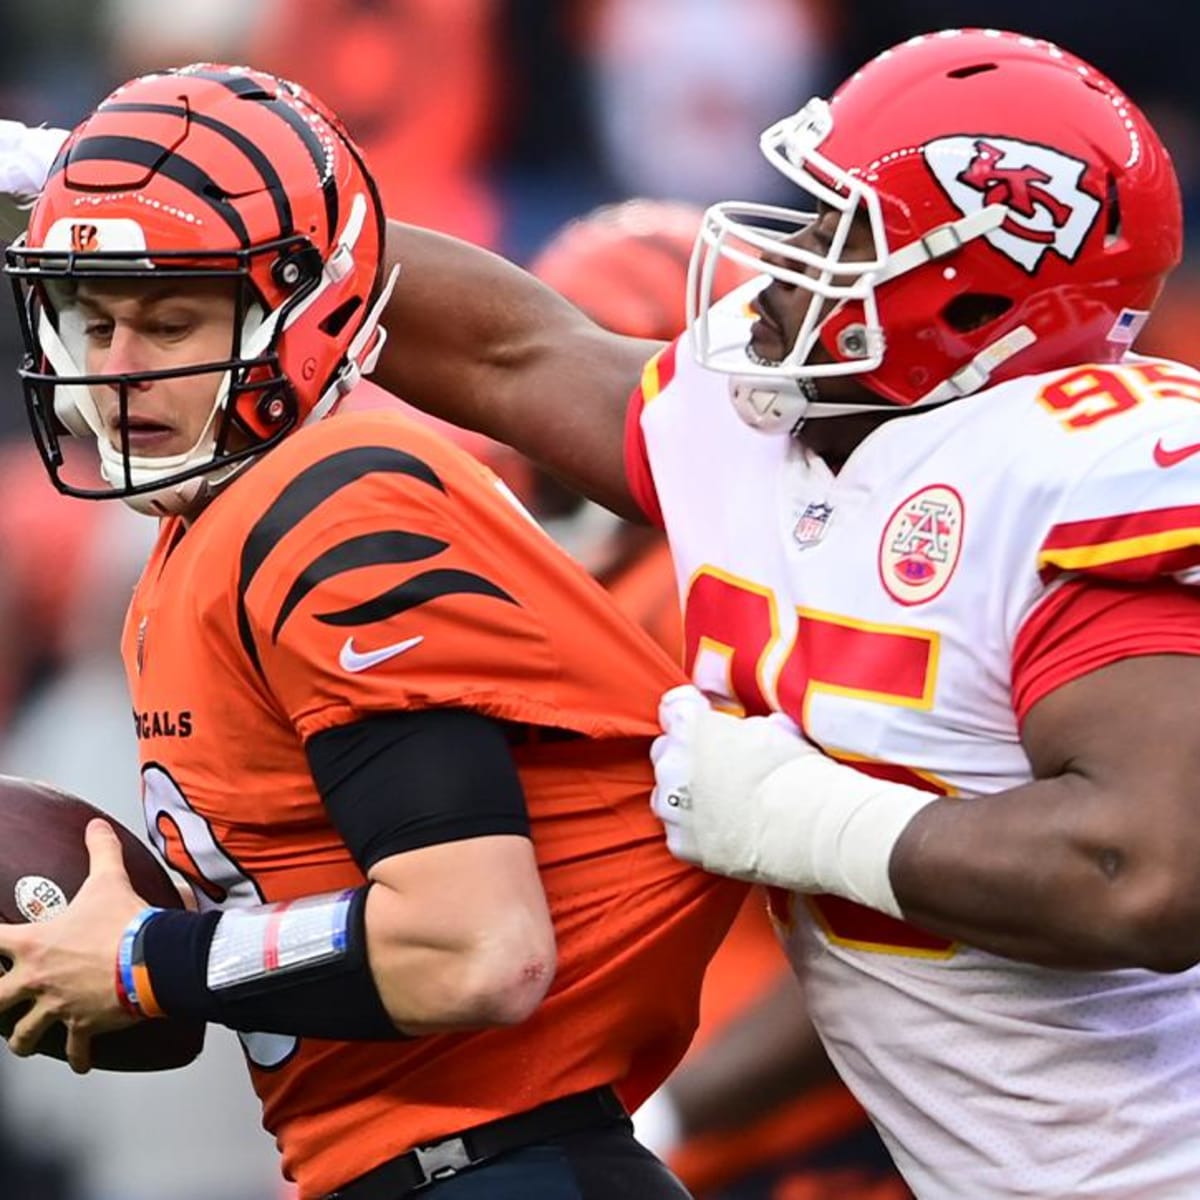 AFC Championship Opening Odds and Spread: Chiefs Listed as Small